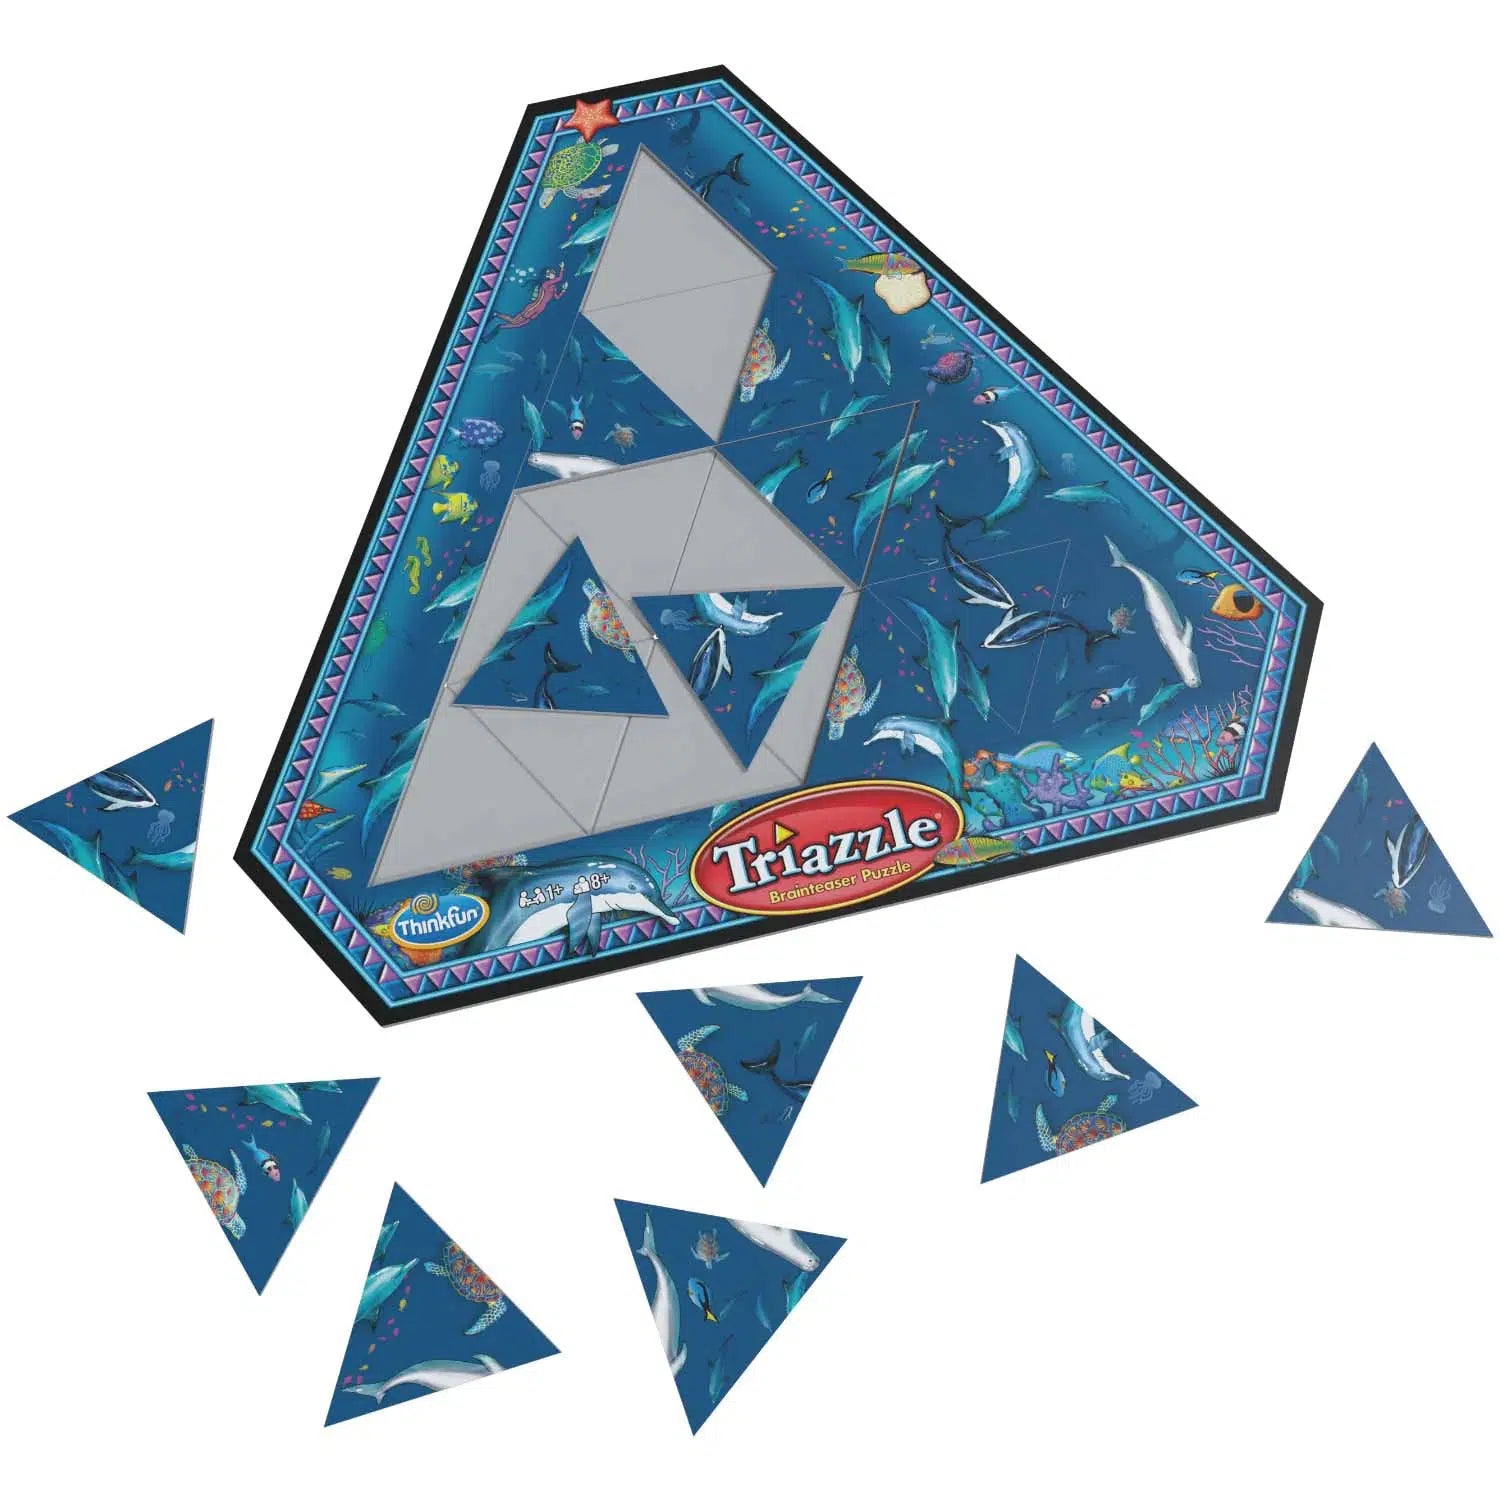 Front view of an assembled triazzle puzzle.